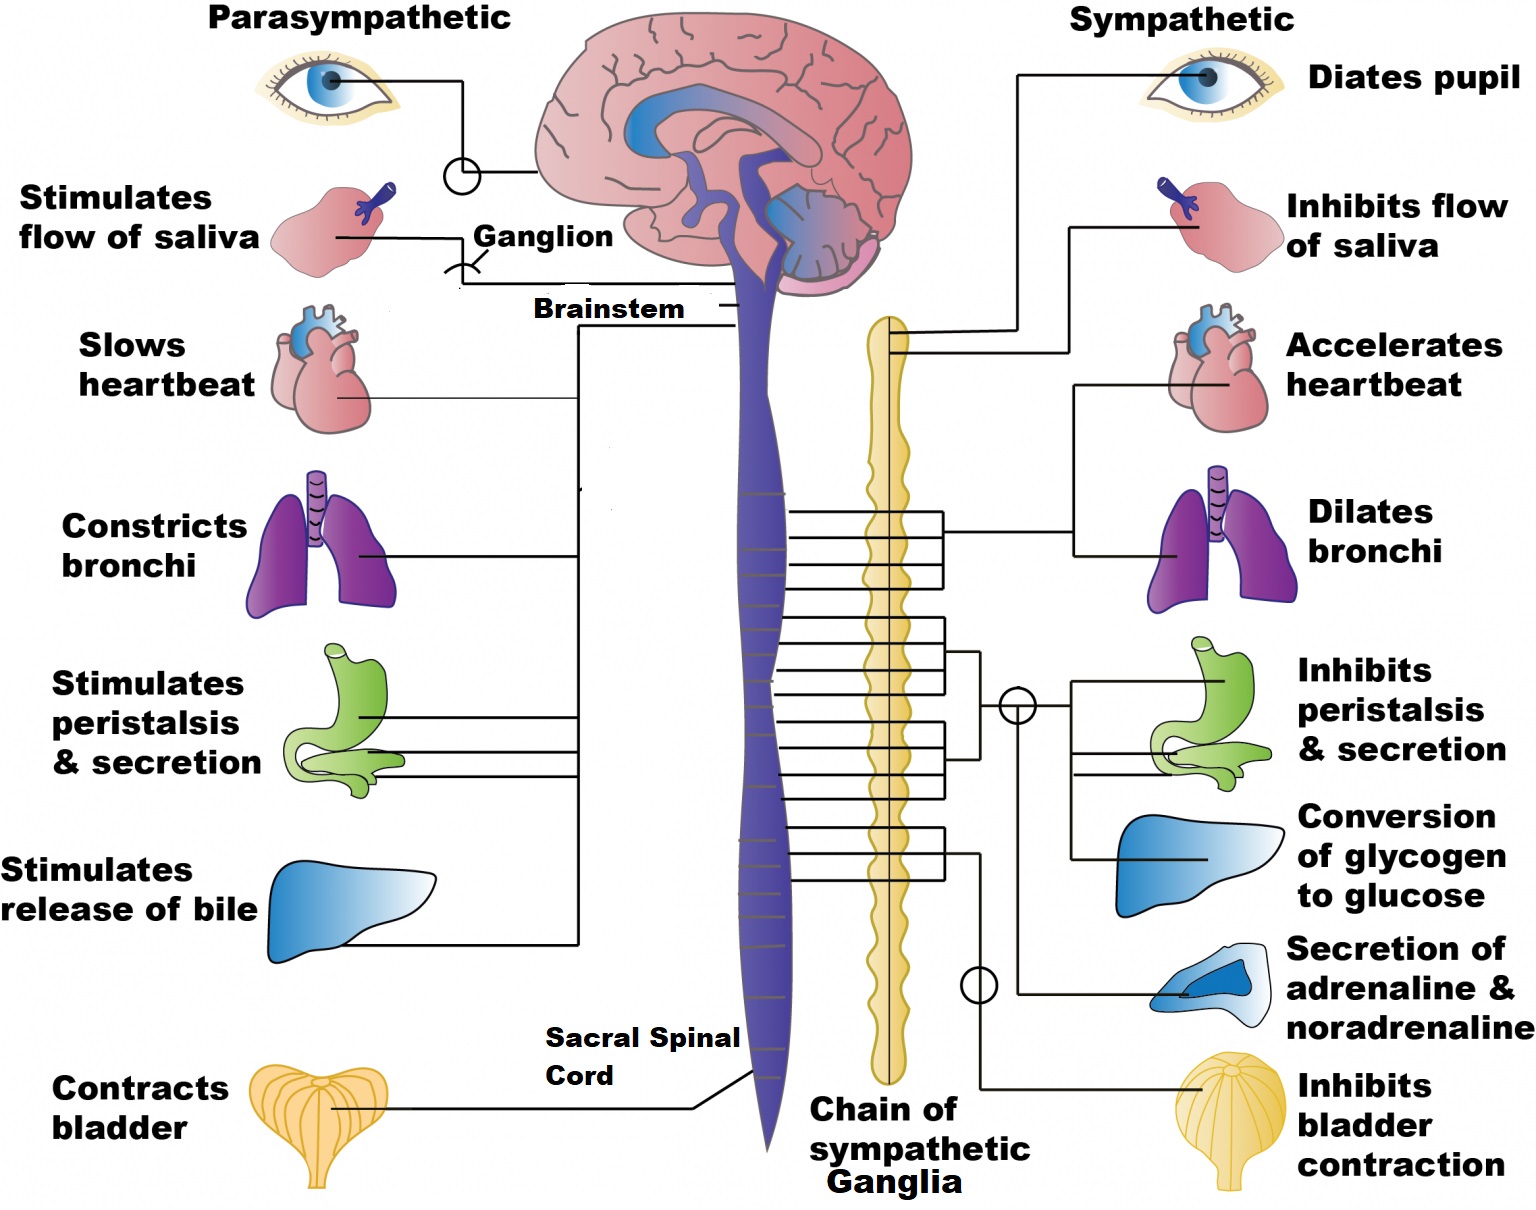 This illustration demonstrates the various functions of the parasympathetic and sympathetic nervous systems. The parasympathetic division is responsible for stimulating the flow of saliva, slowing the heartbeat, constricting the bronchi, stimulating peristalsis and secretions gastrointestinal secretions, stimulating release of bile from the gallbladder, and contracting the bladder. The sympathetic nervous system dilates the pupils, inhibits flow of saliva, accelerates heartbeat, dilates bronchi, inhibits peristalsis and gastrointestinal secretions, converts glycogen to glucose and secretes noradrenaline, and inhibits bladder contraction.